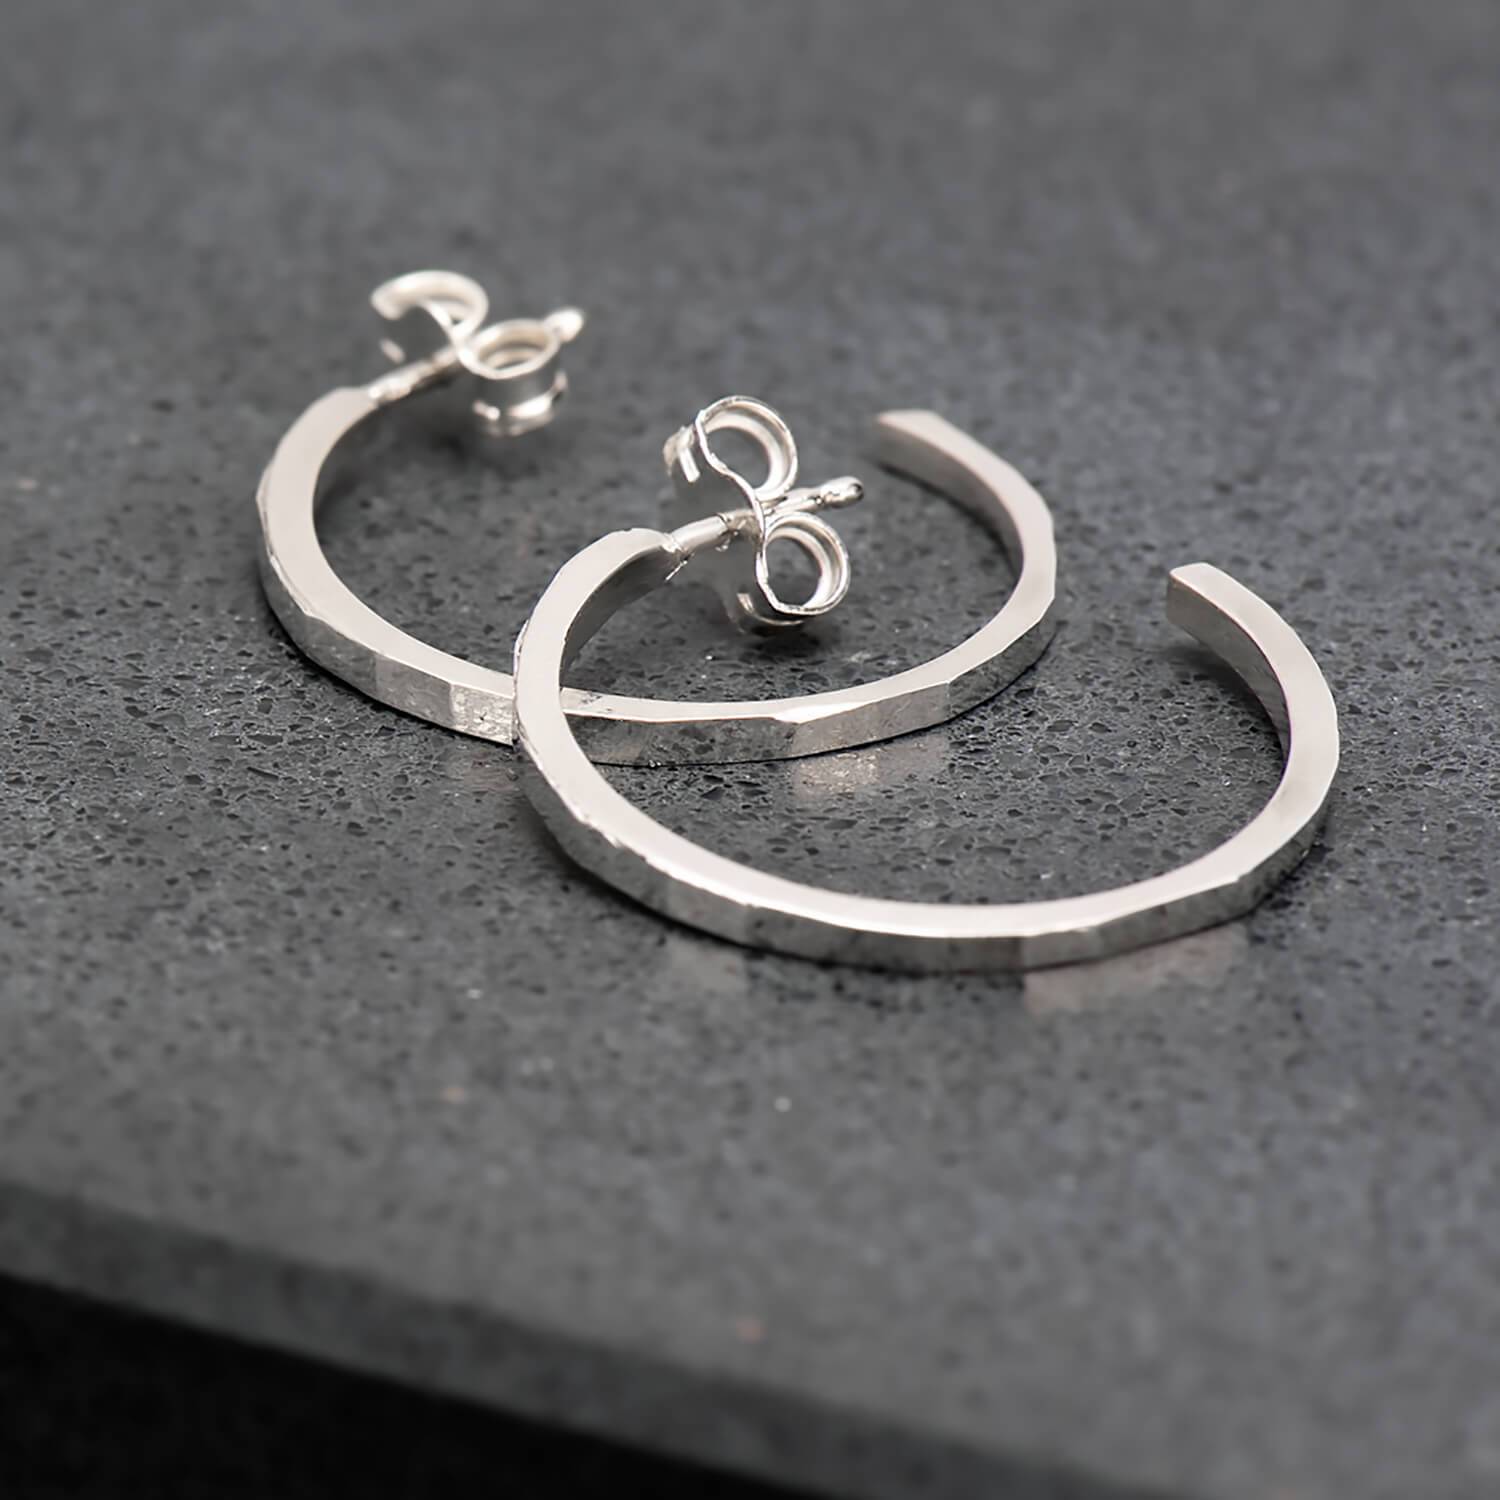 Thin, hammer finished hoop earrings in recycled sterling silver.